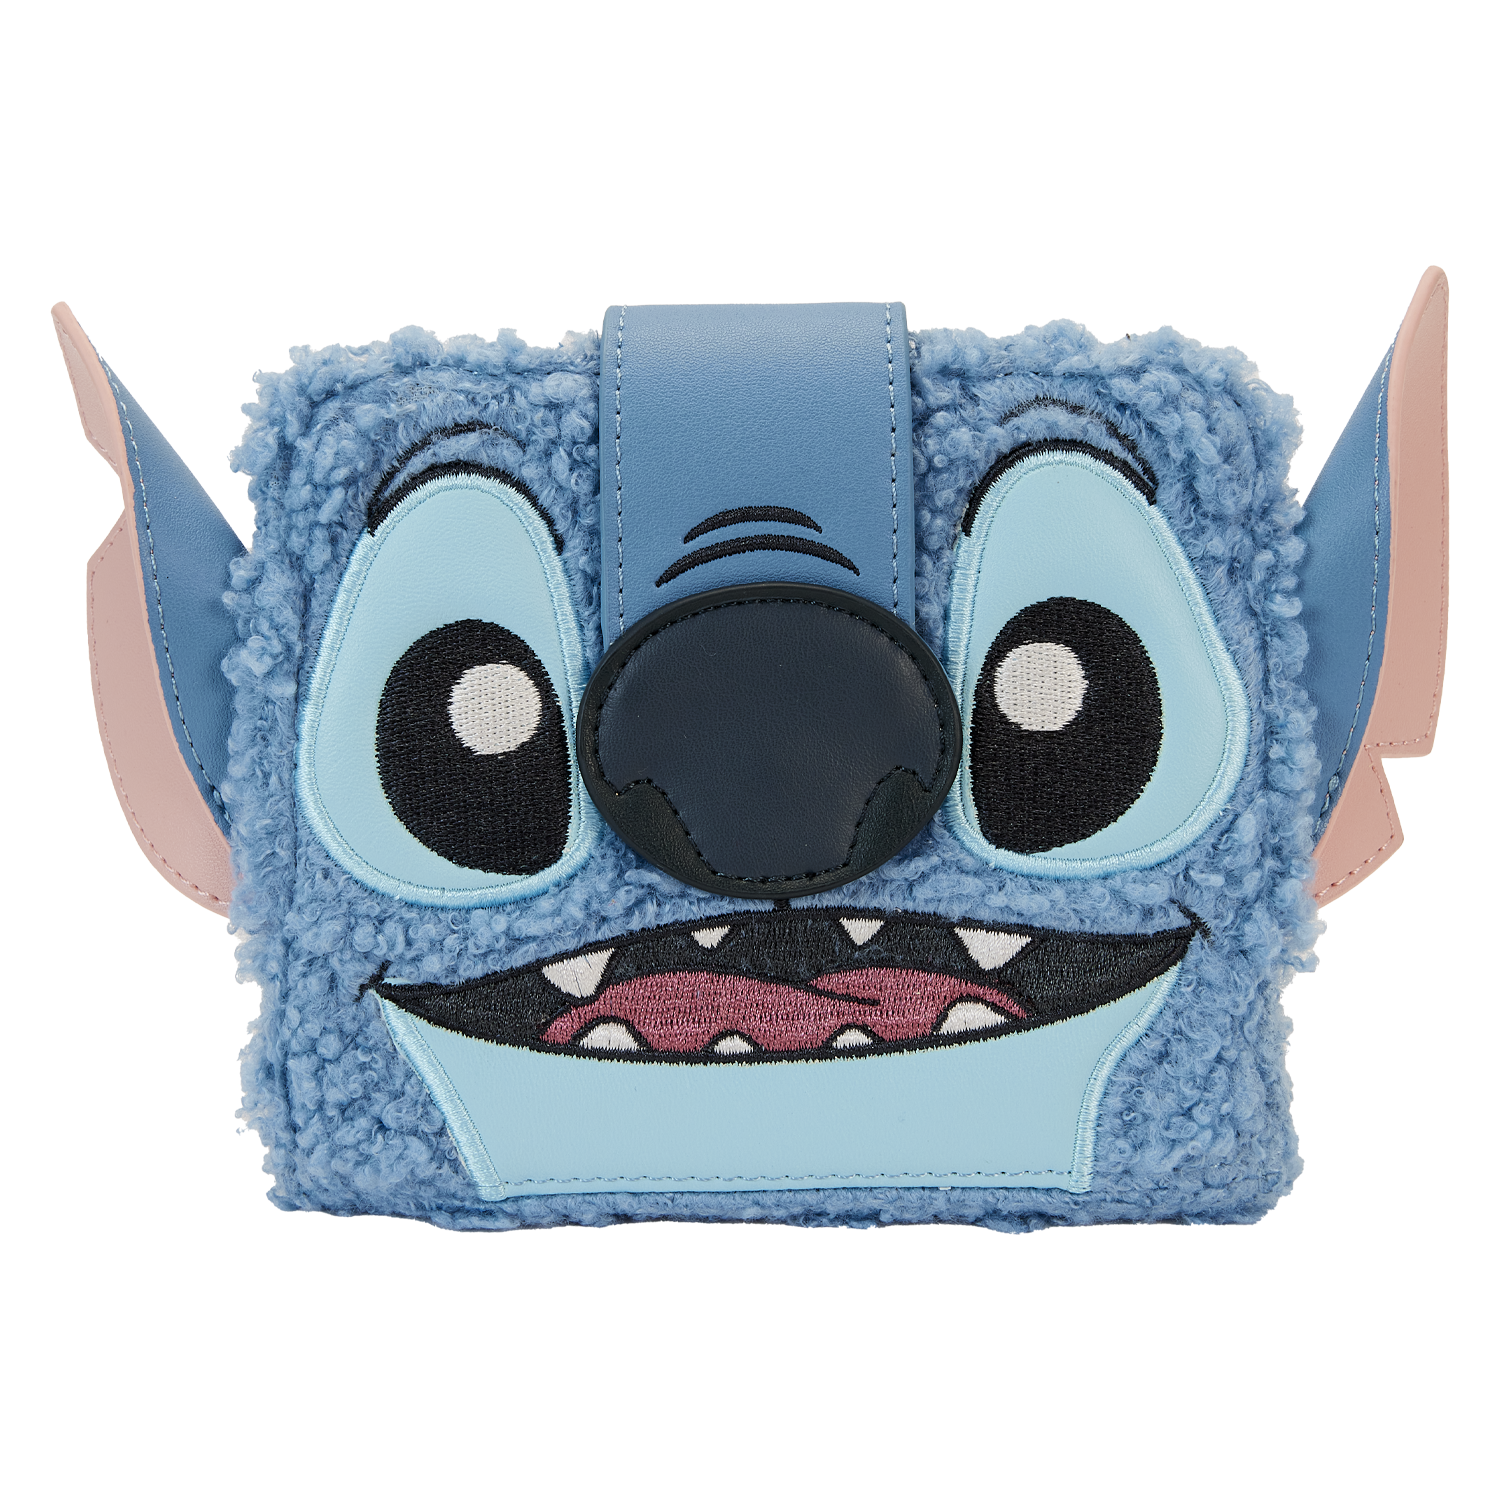 NEW 2016 Disney Loungefly Lilo Stitch FACE Teeth Ears Backpack